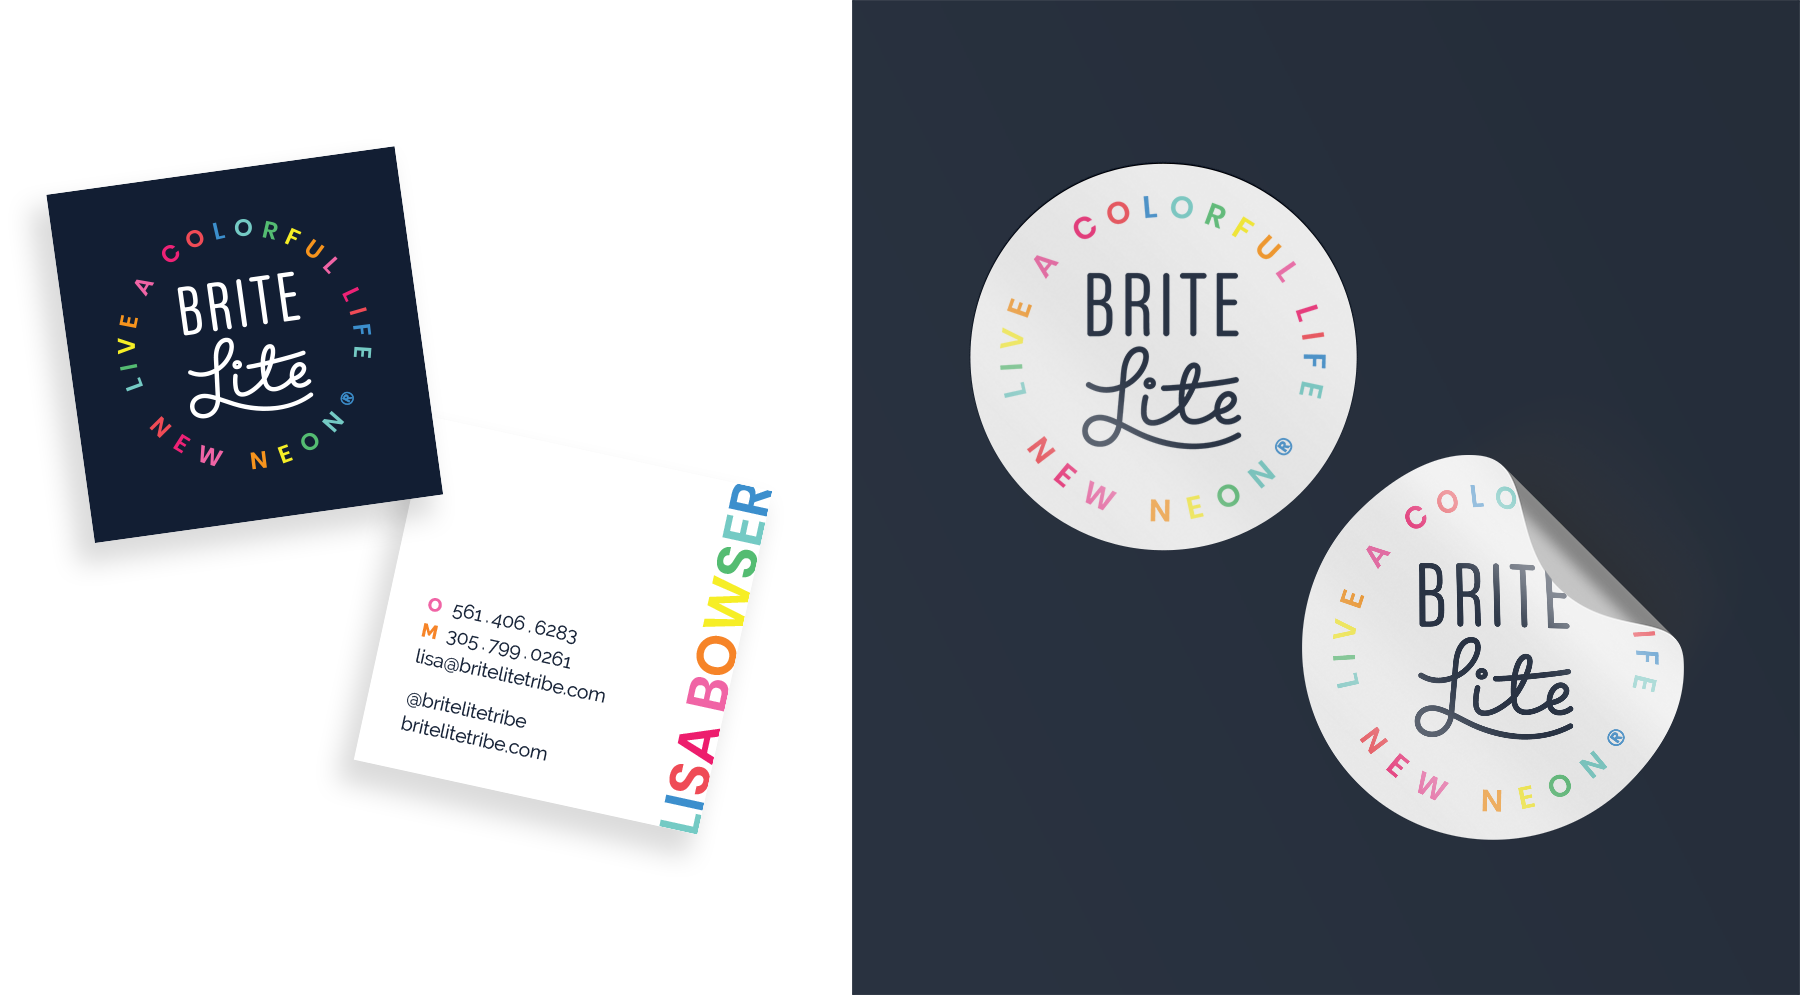 Brite Lite business cards with circular logo in white and rainbow type on a dark navy background, the back is white with the owners name anchored vertically in rainbow, with navy business information. Colorful circular stickers are shown next to it.